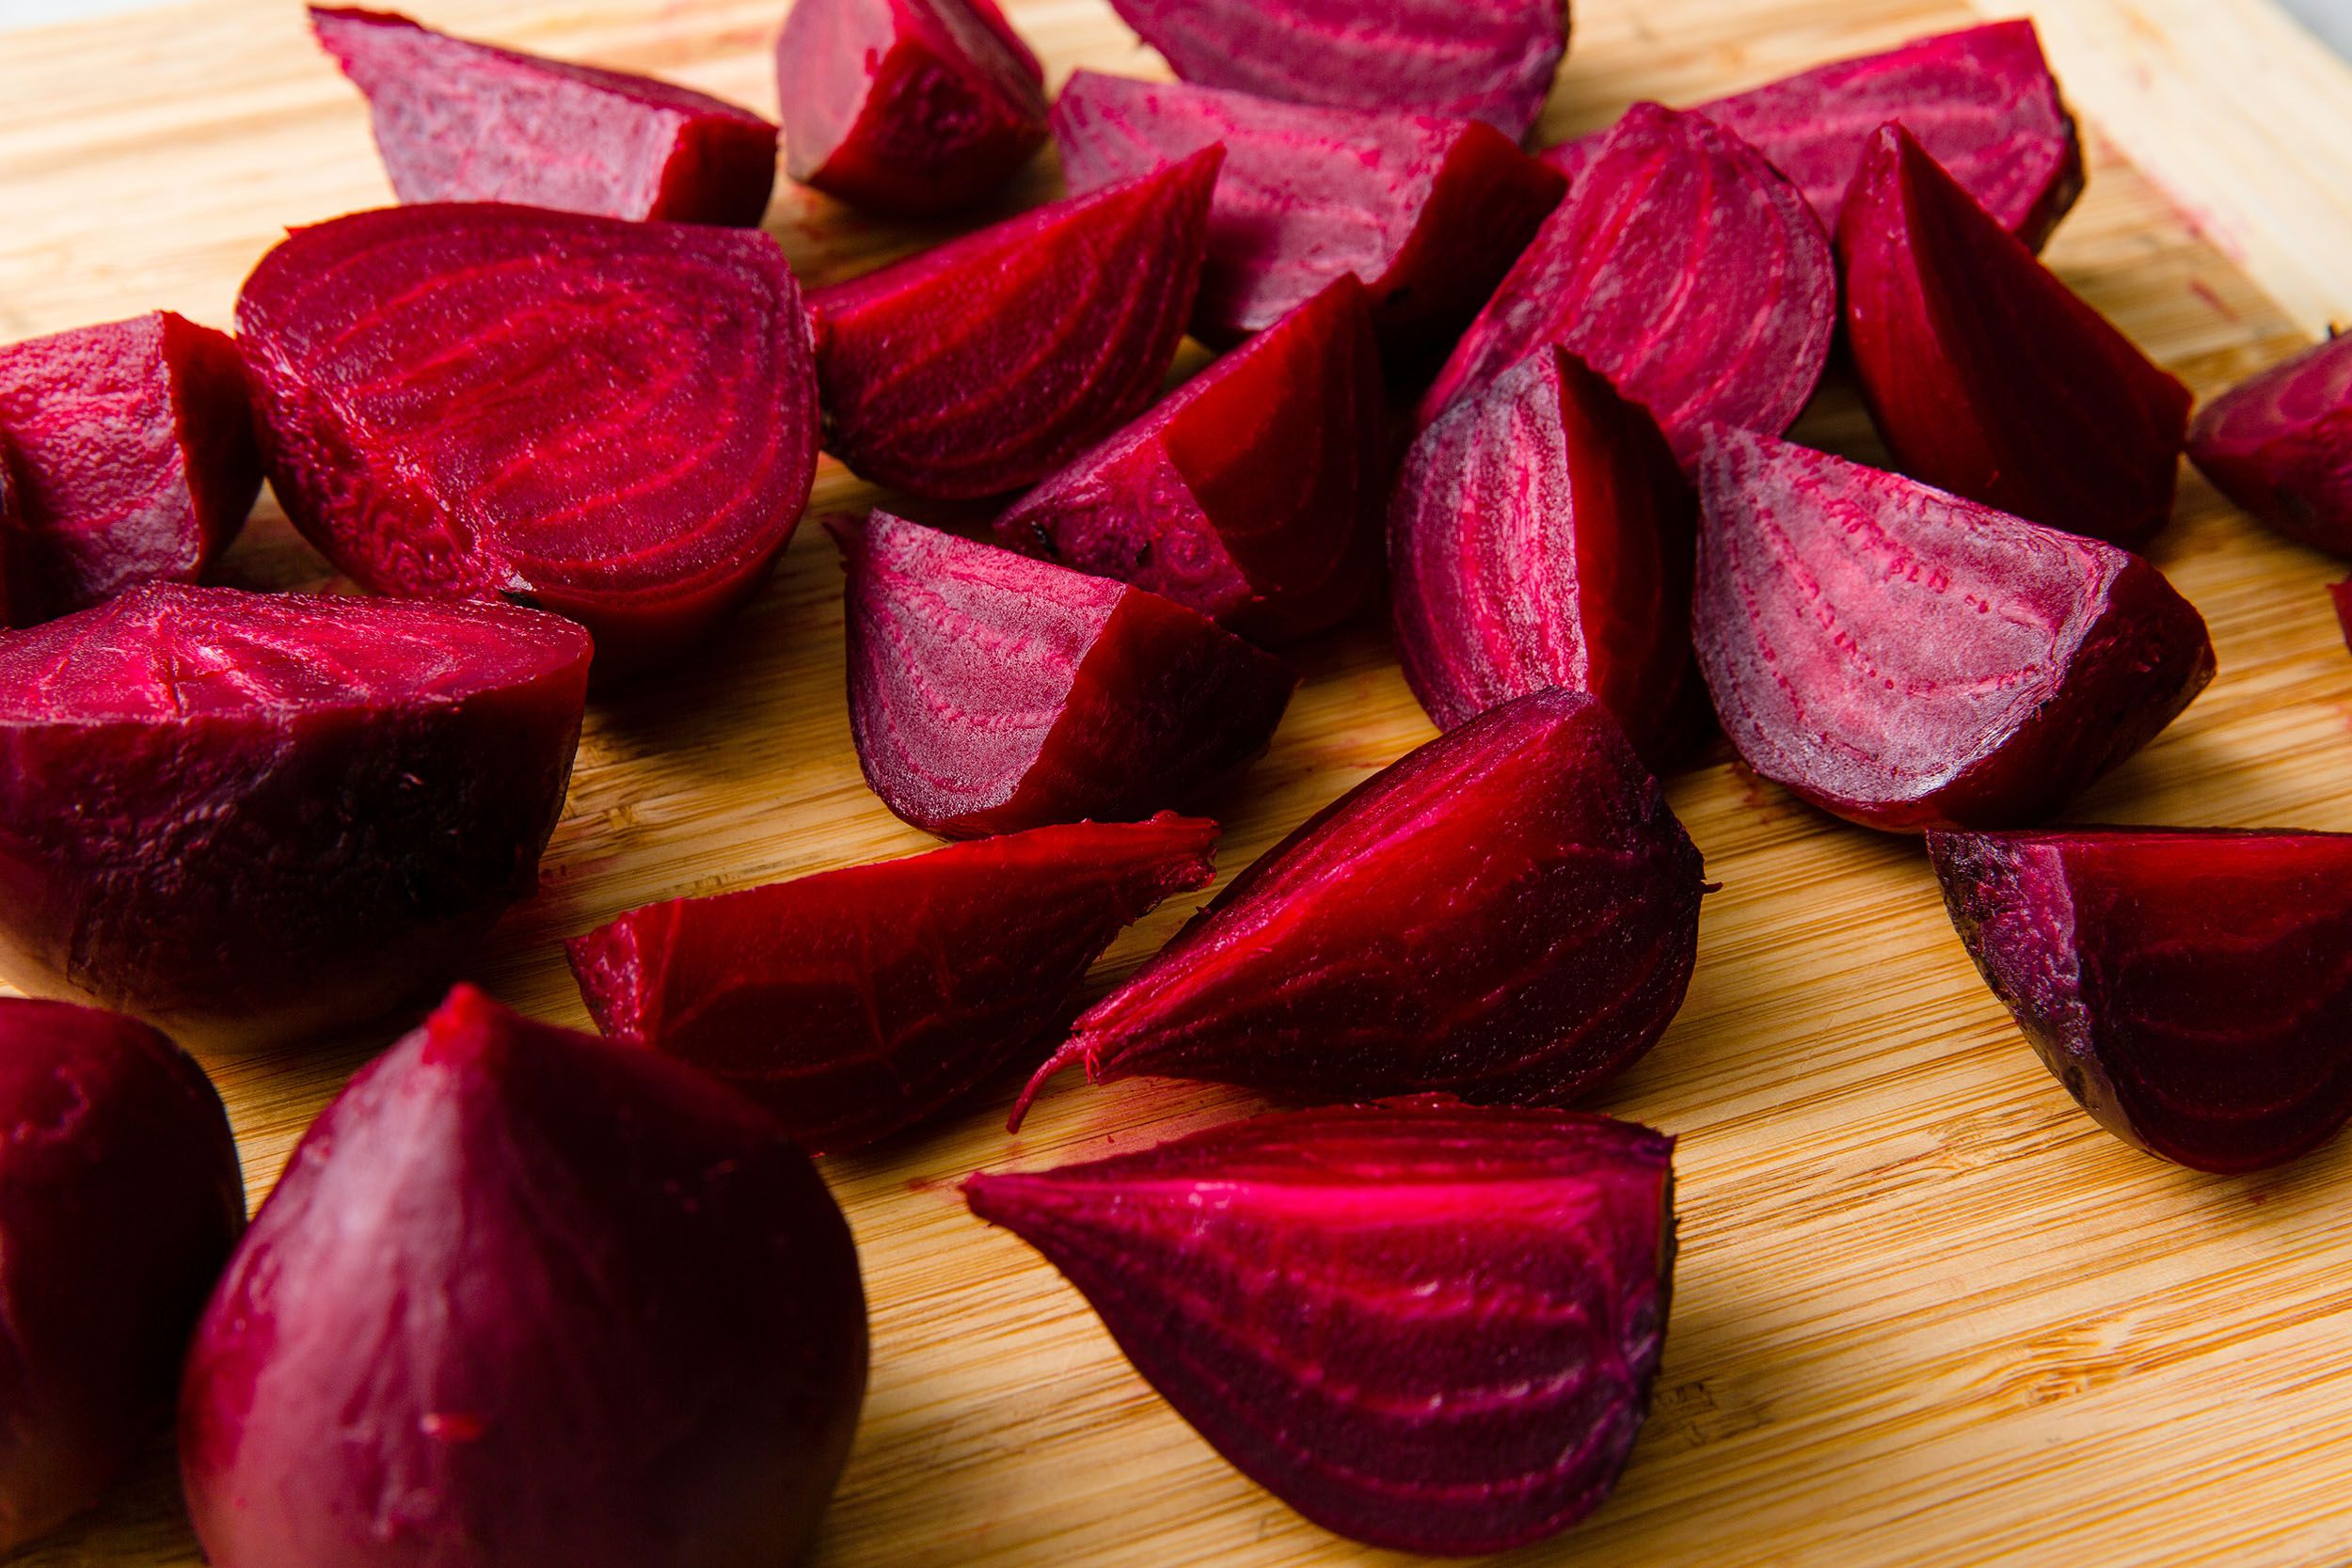 Best Roasted Beets Recipe - How To Roast Beets